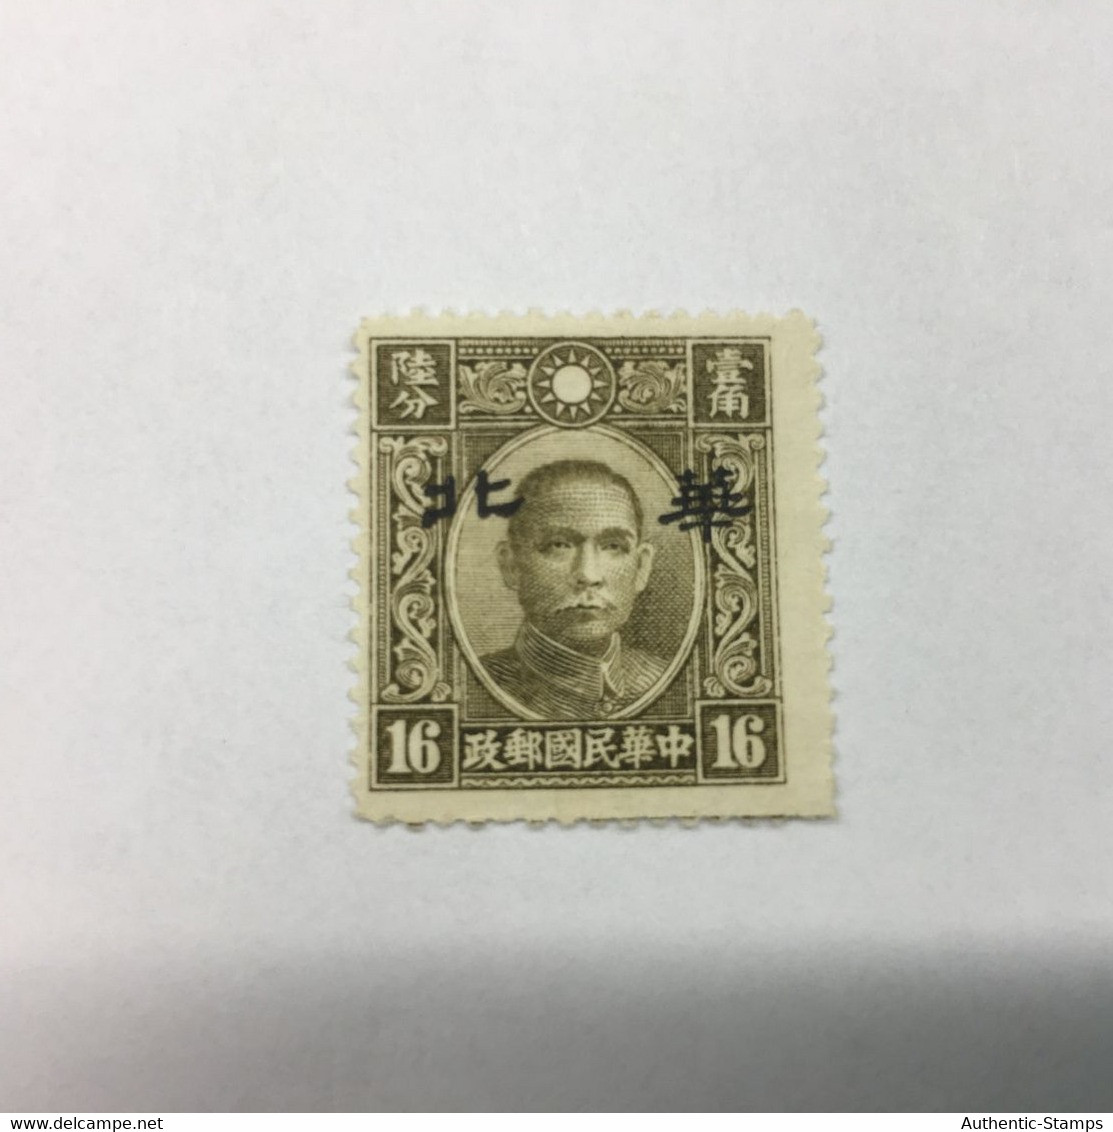 CHINA STAMP, UNUSED, TIMBRO, STEMPEL, CINA, CHINE, LIST 5808 - 1941-45 Chine Du Nord